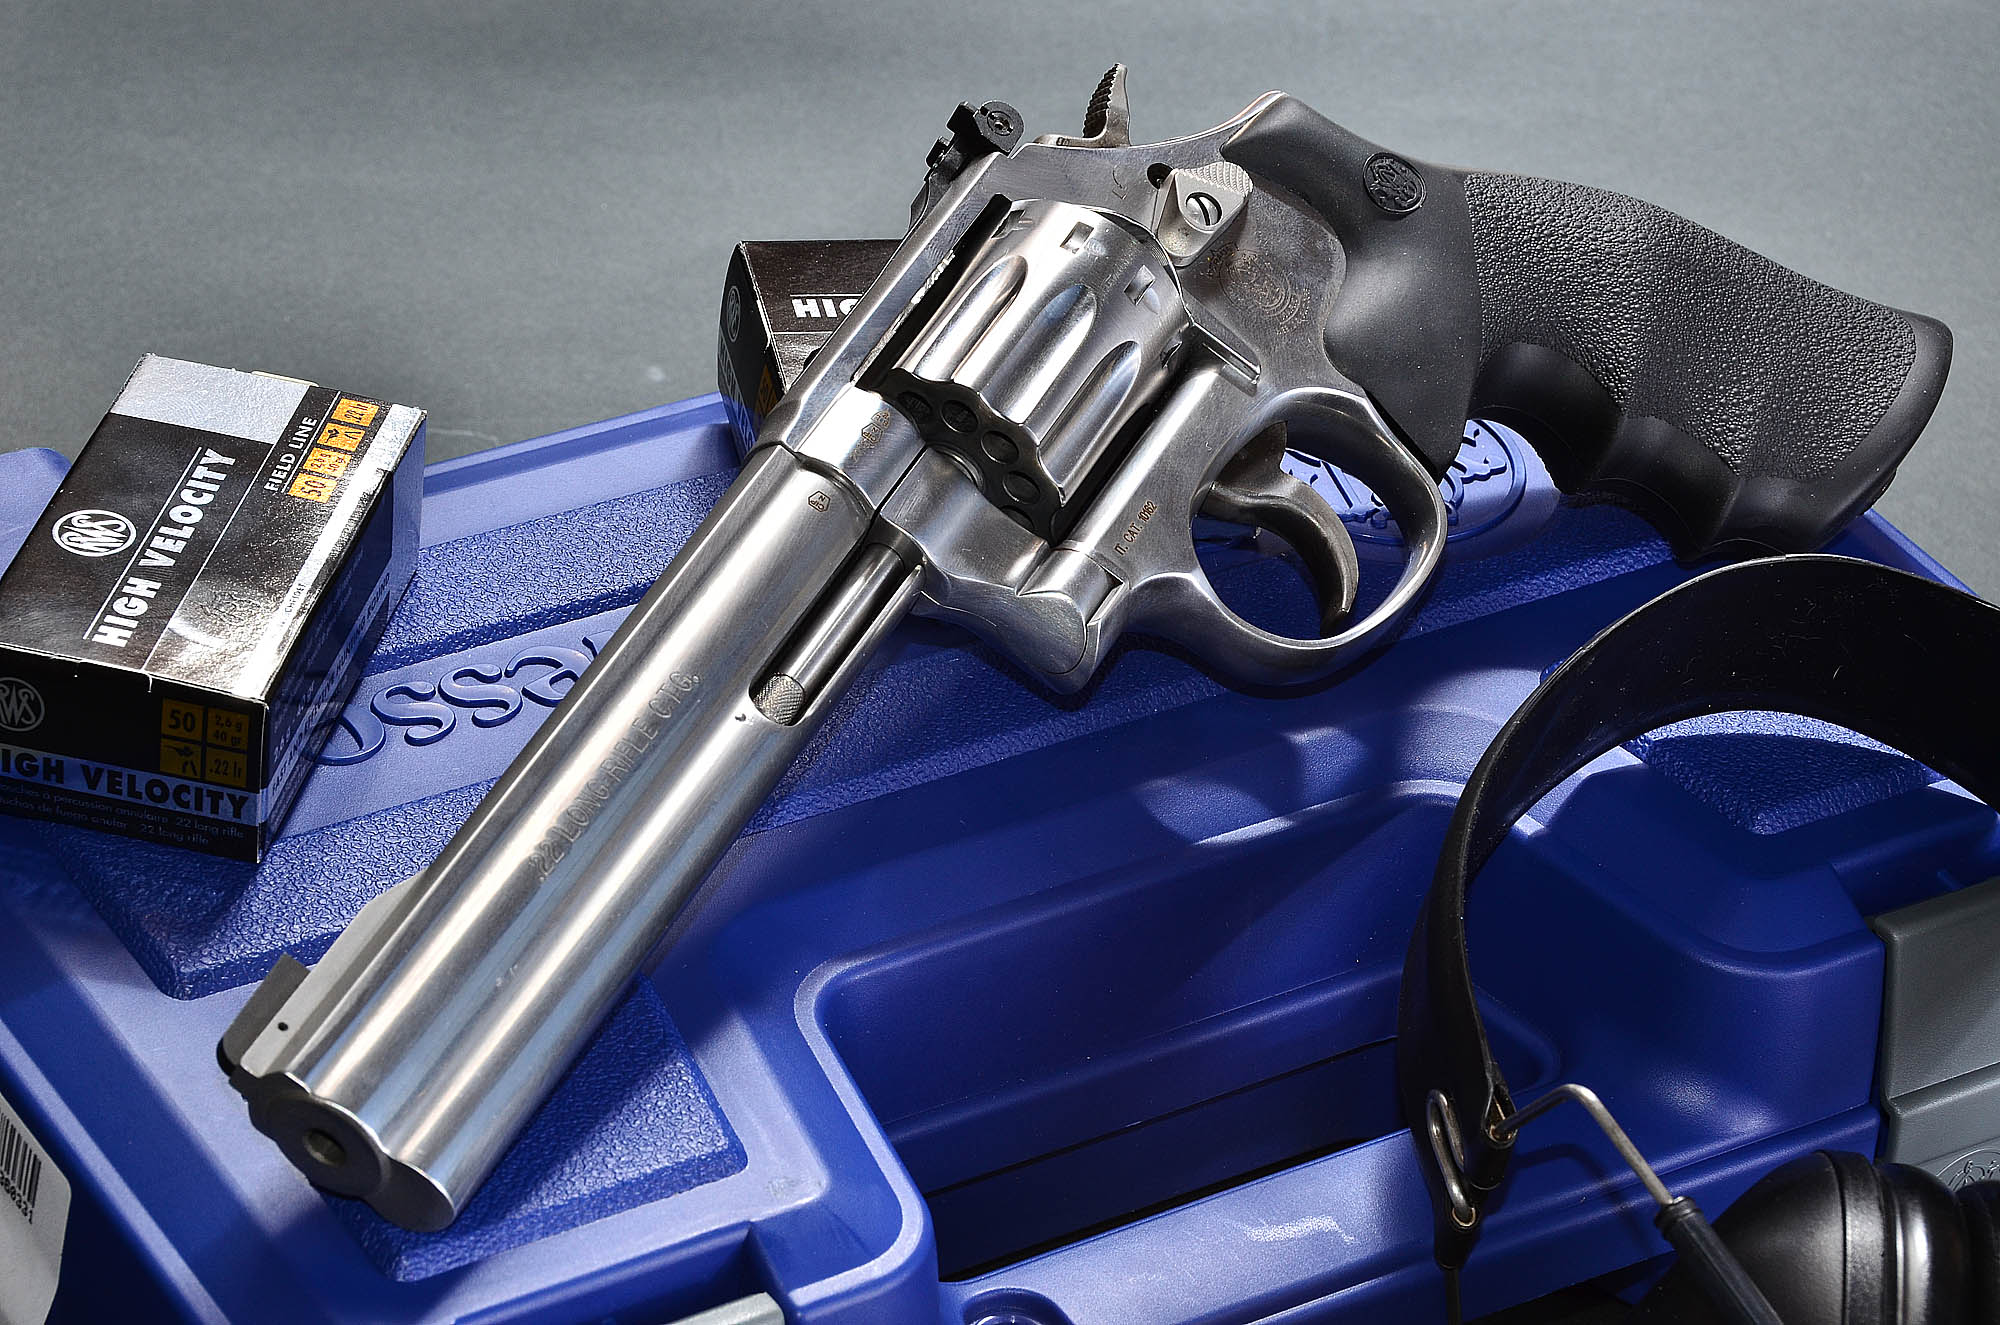 smith-wesson-model-617-smith-wesson-pistols-articles